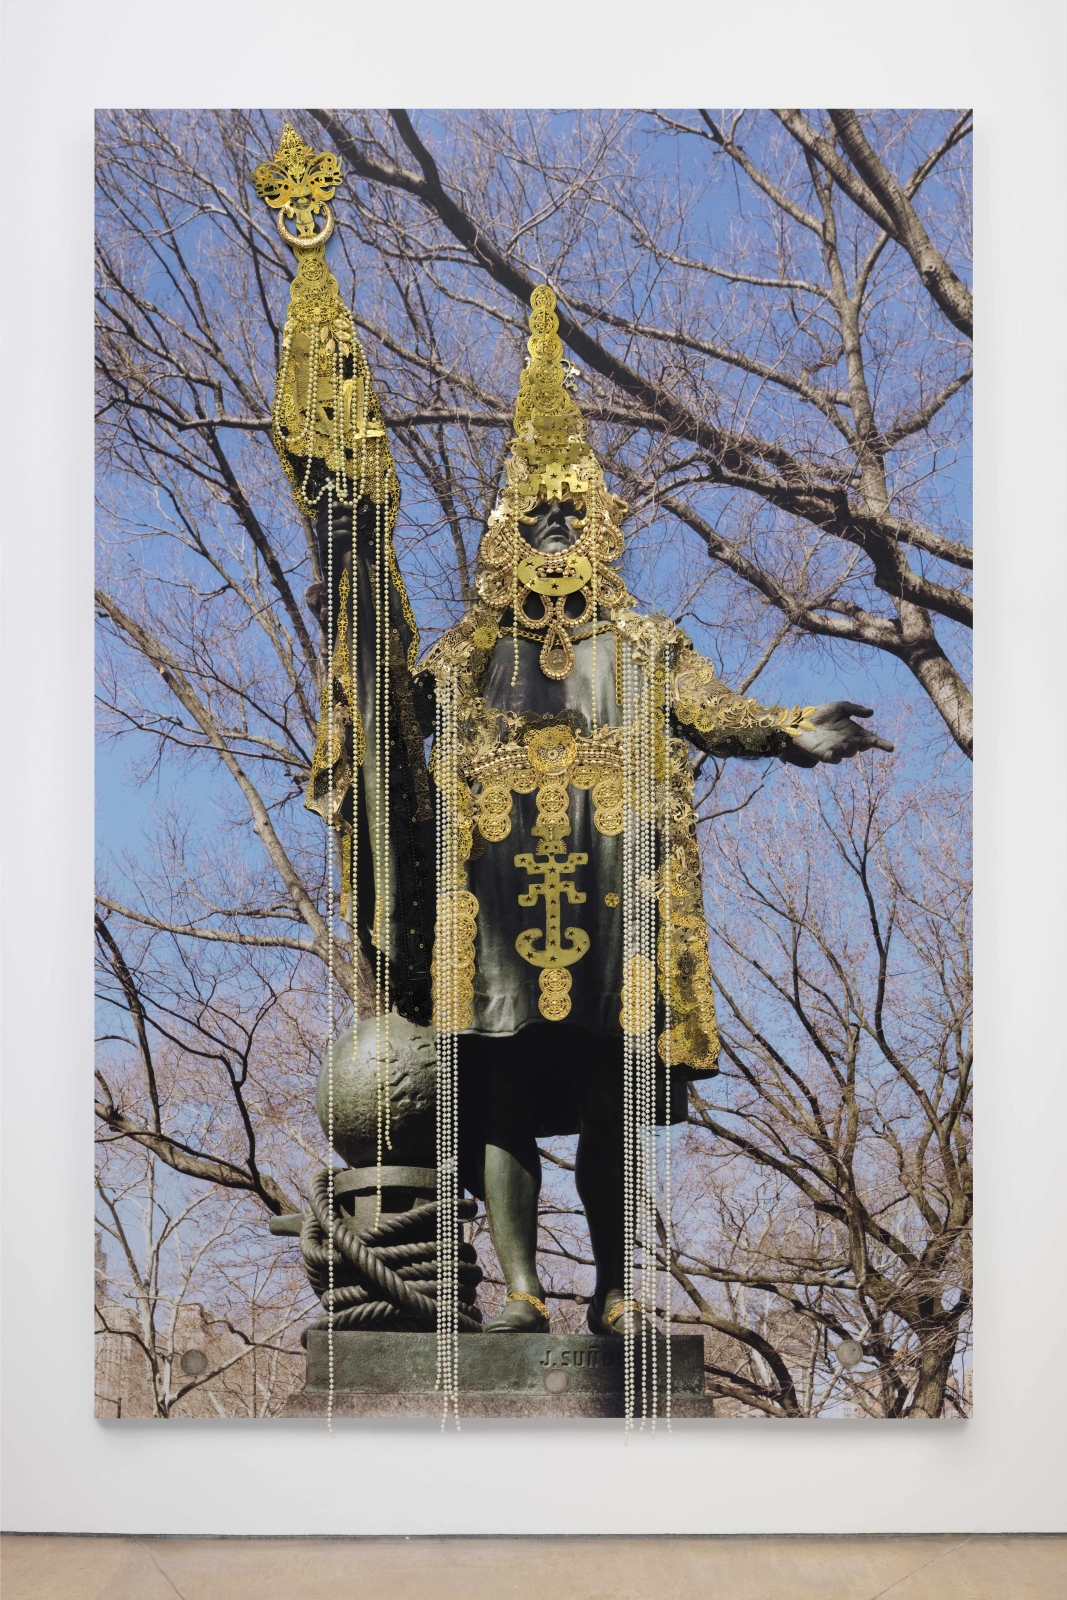 Hew Locke
Columbus, Central Park, 2018
c-type photograph with mixed media
72 x 48 ins.
182.9 x 121.9 cm